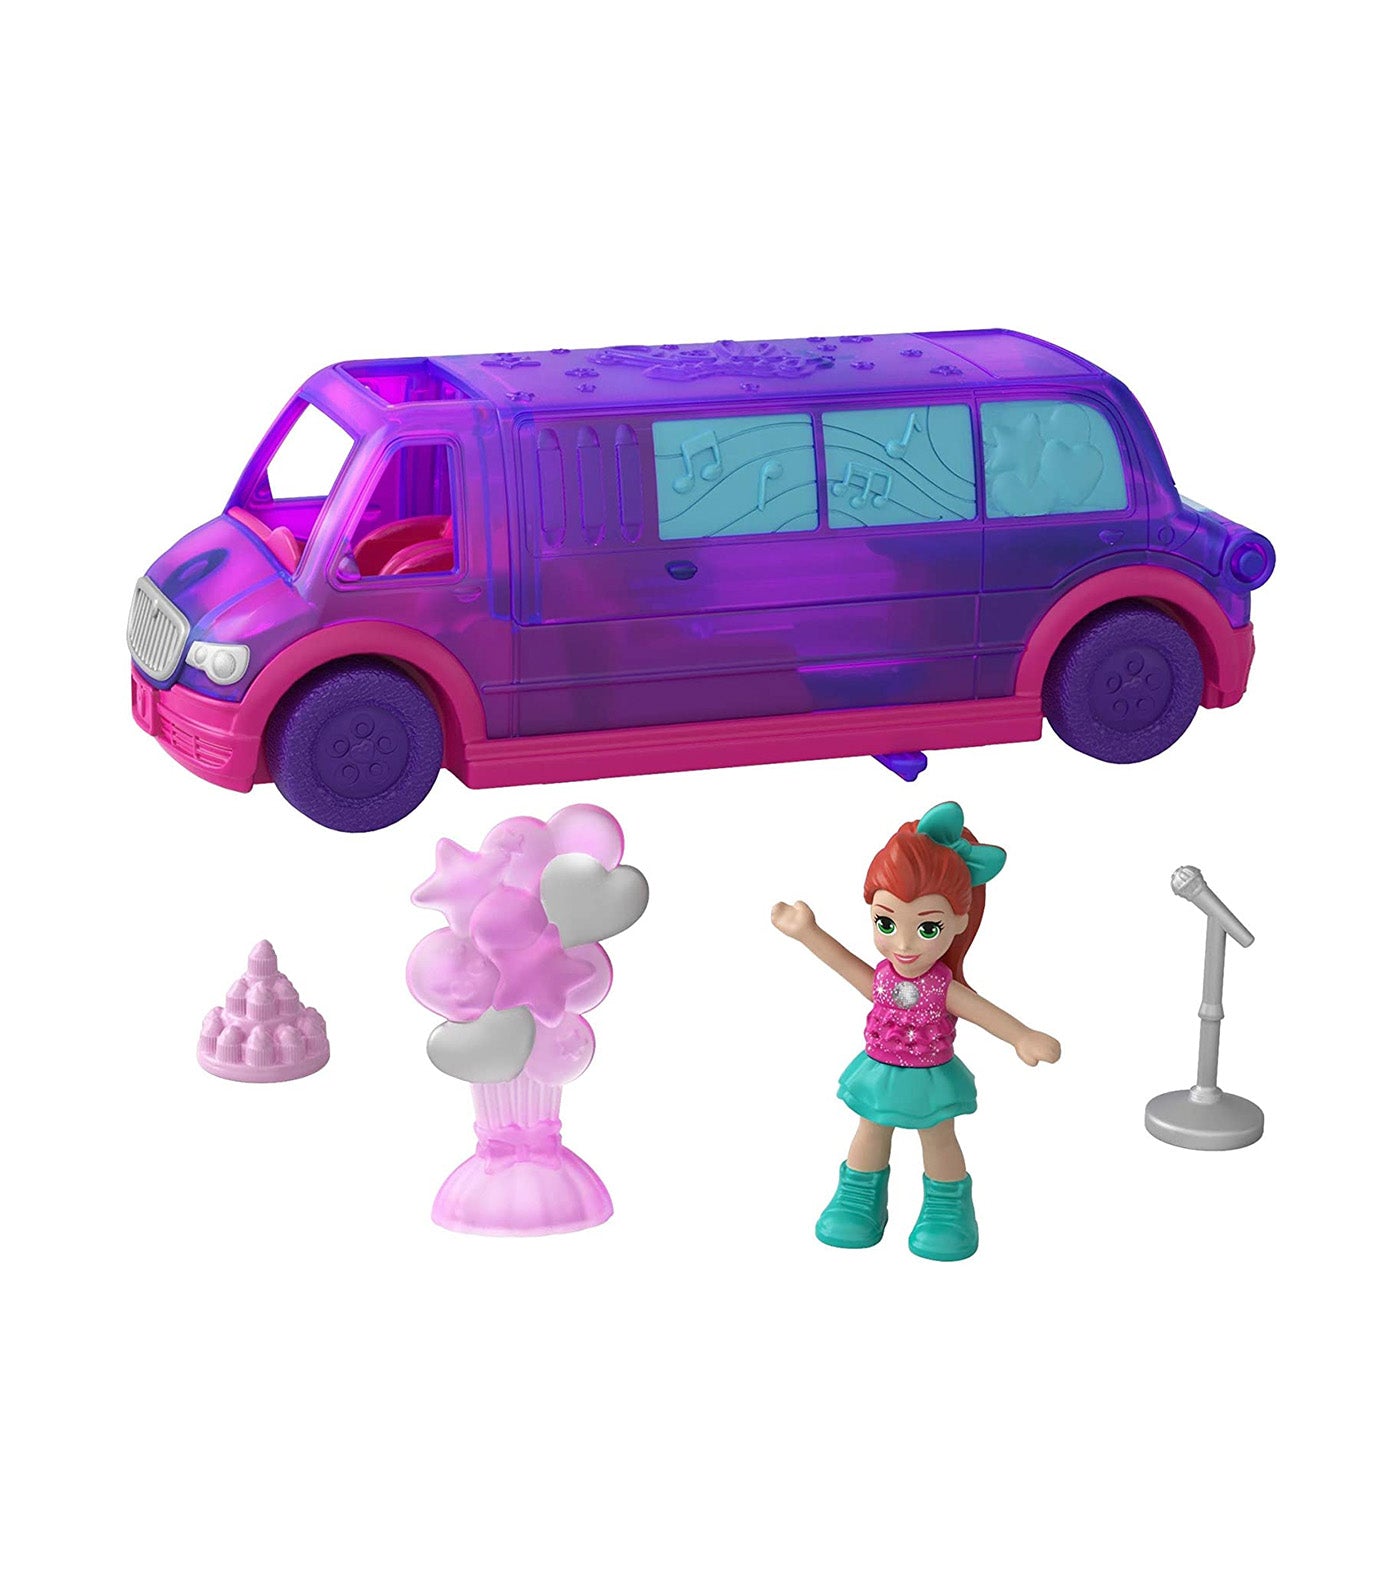 Compact Places Pollyville Vehicle